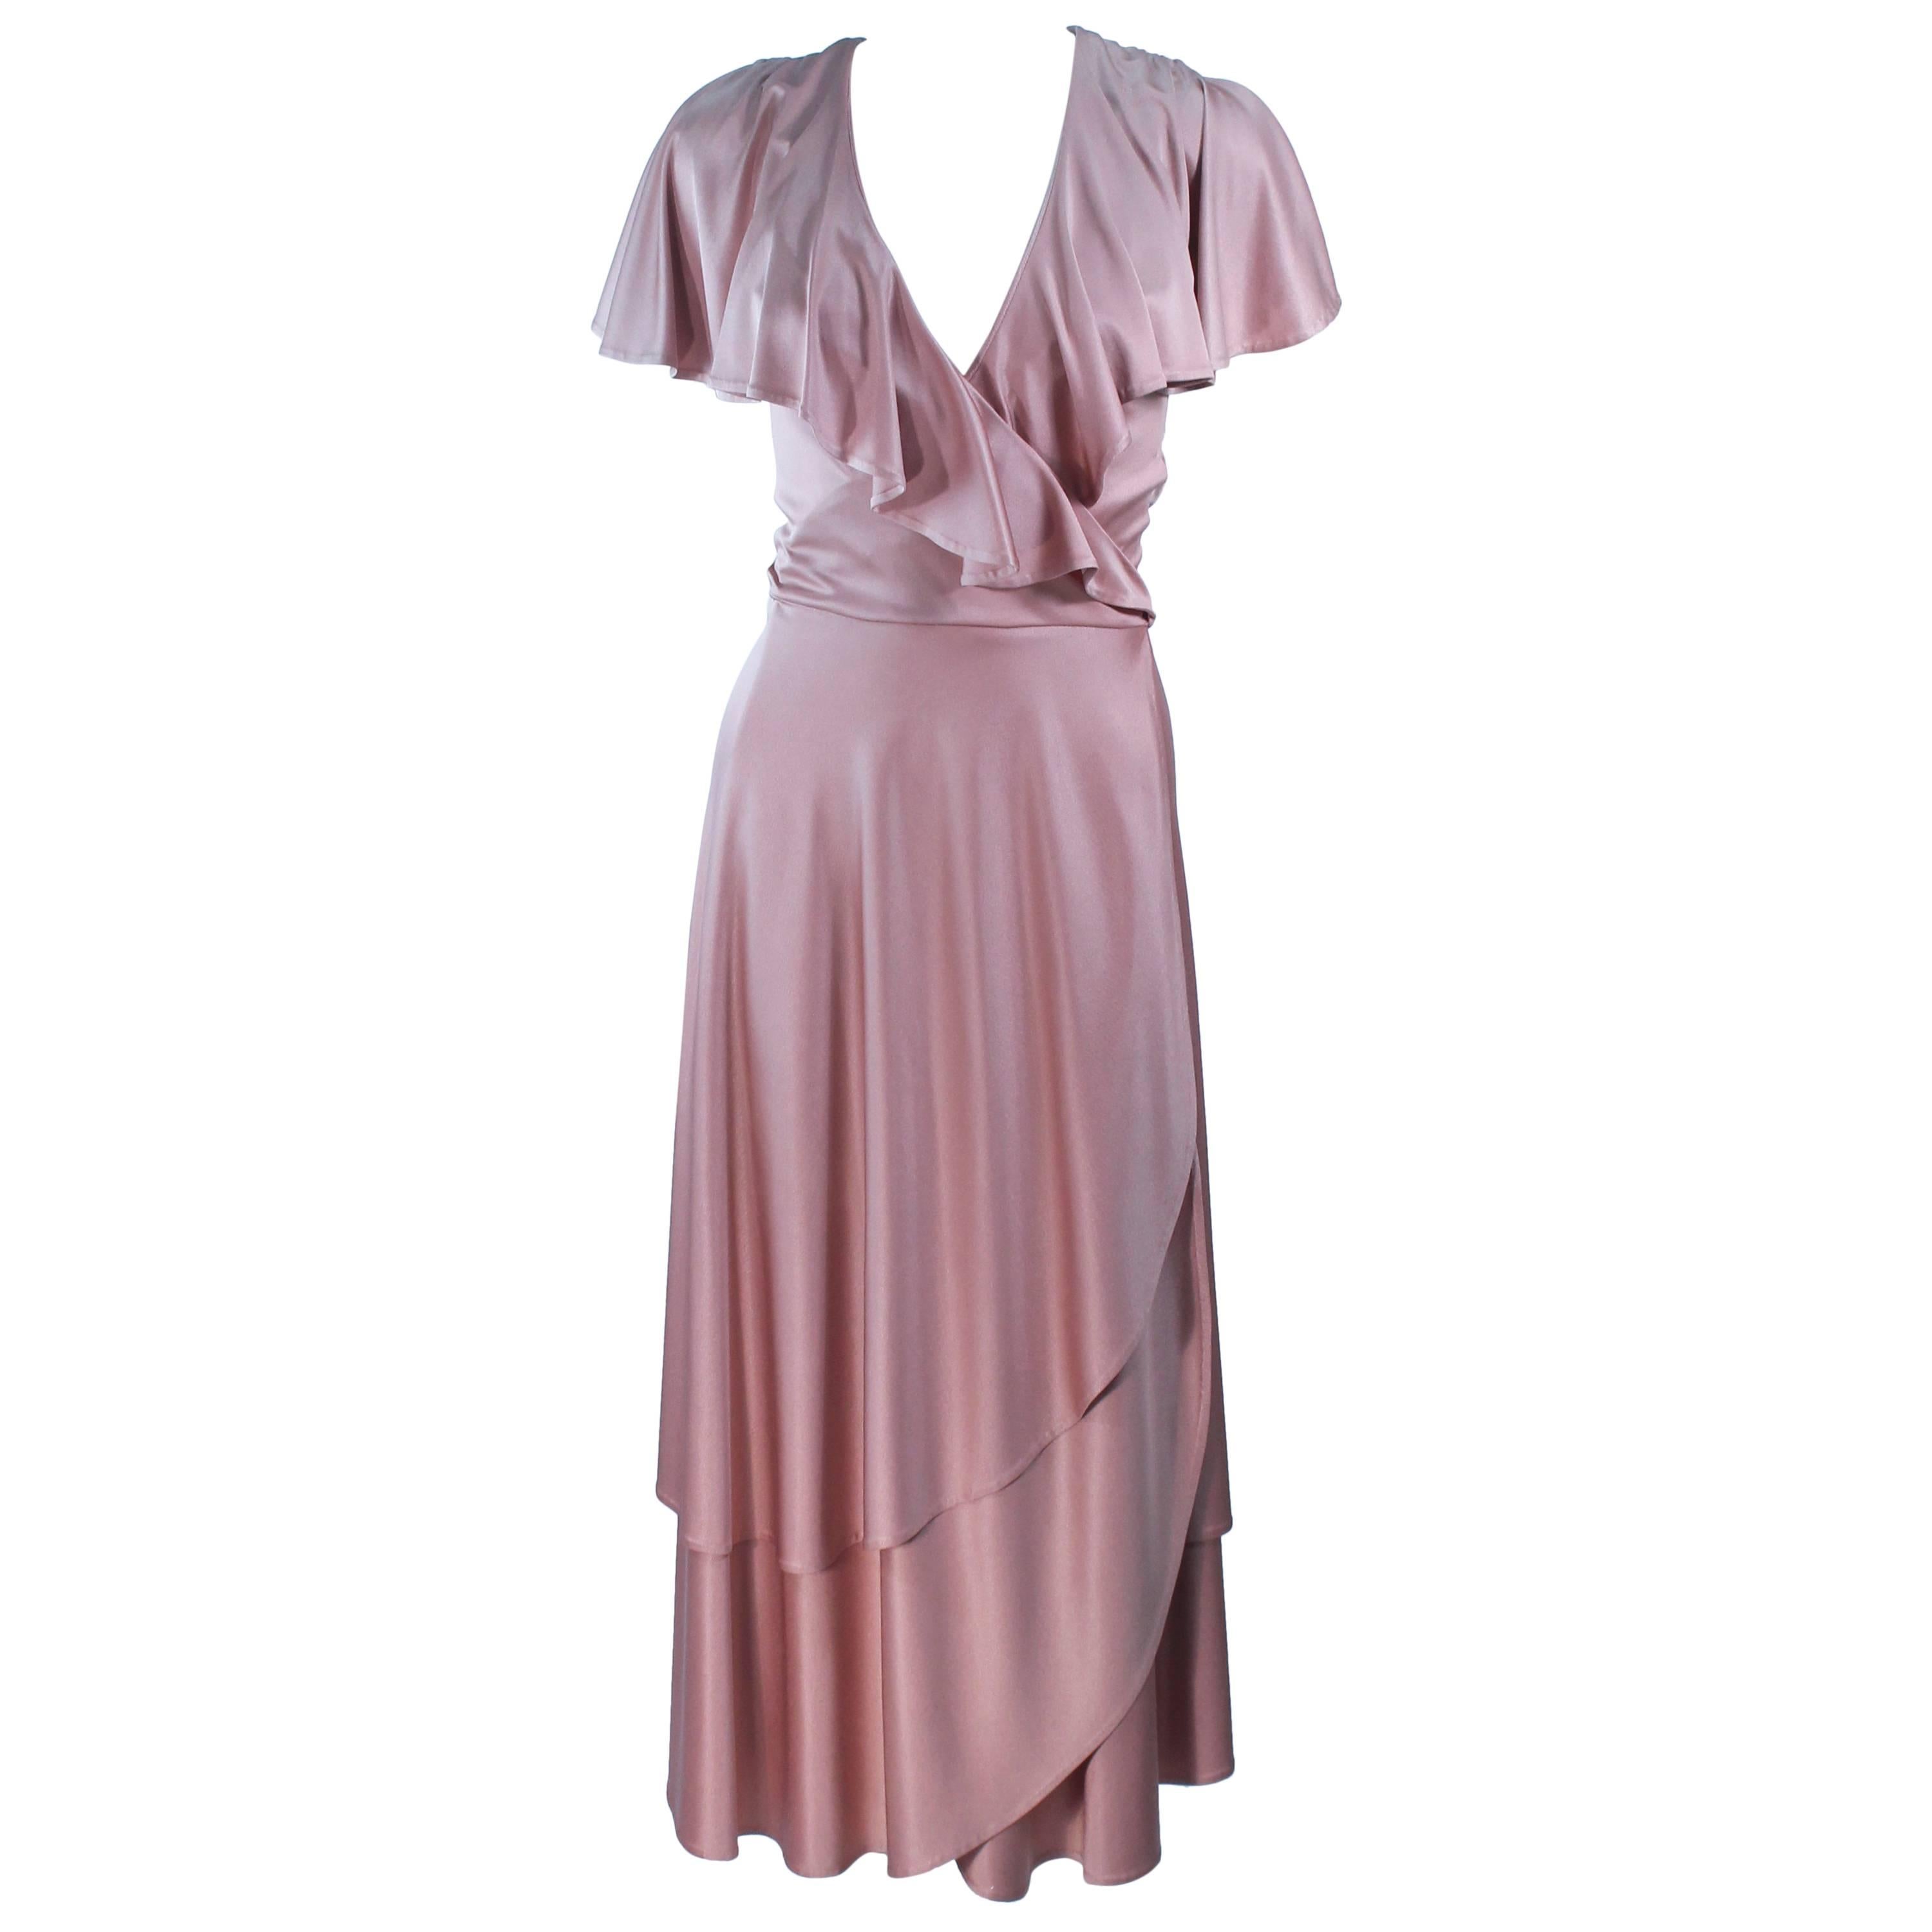 ELIZABETH MASON COUTURE Blush Silk Jersey Ruffled Cocktail Dress Made to Order For Sale